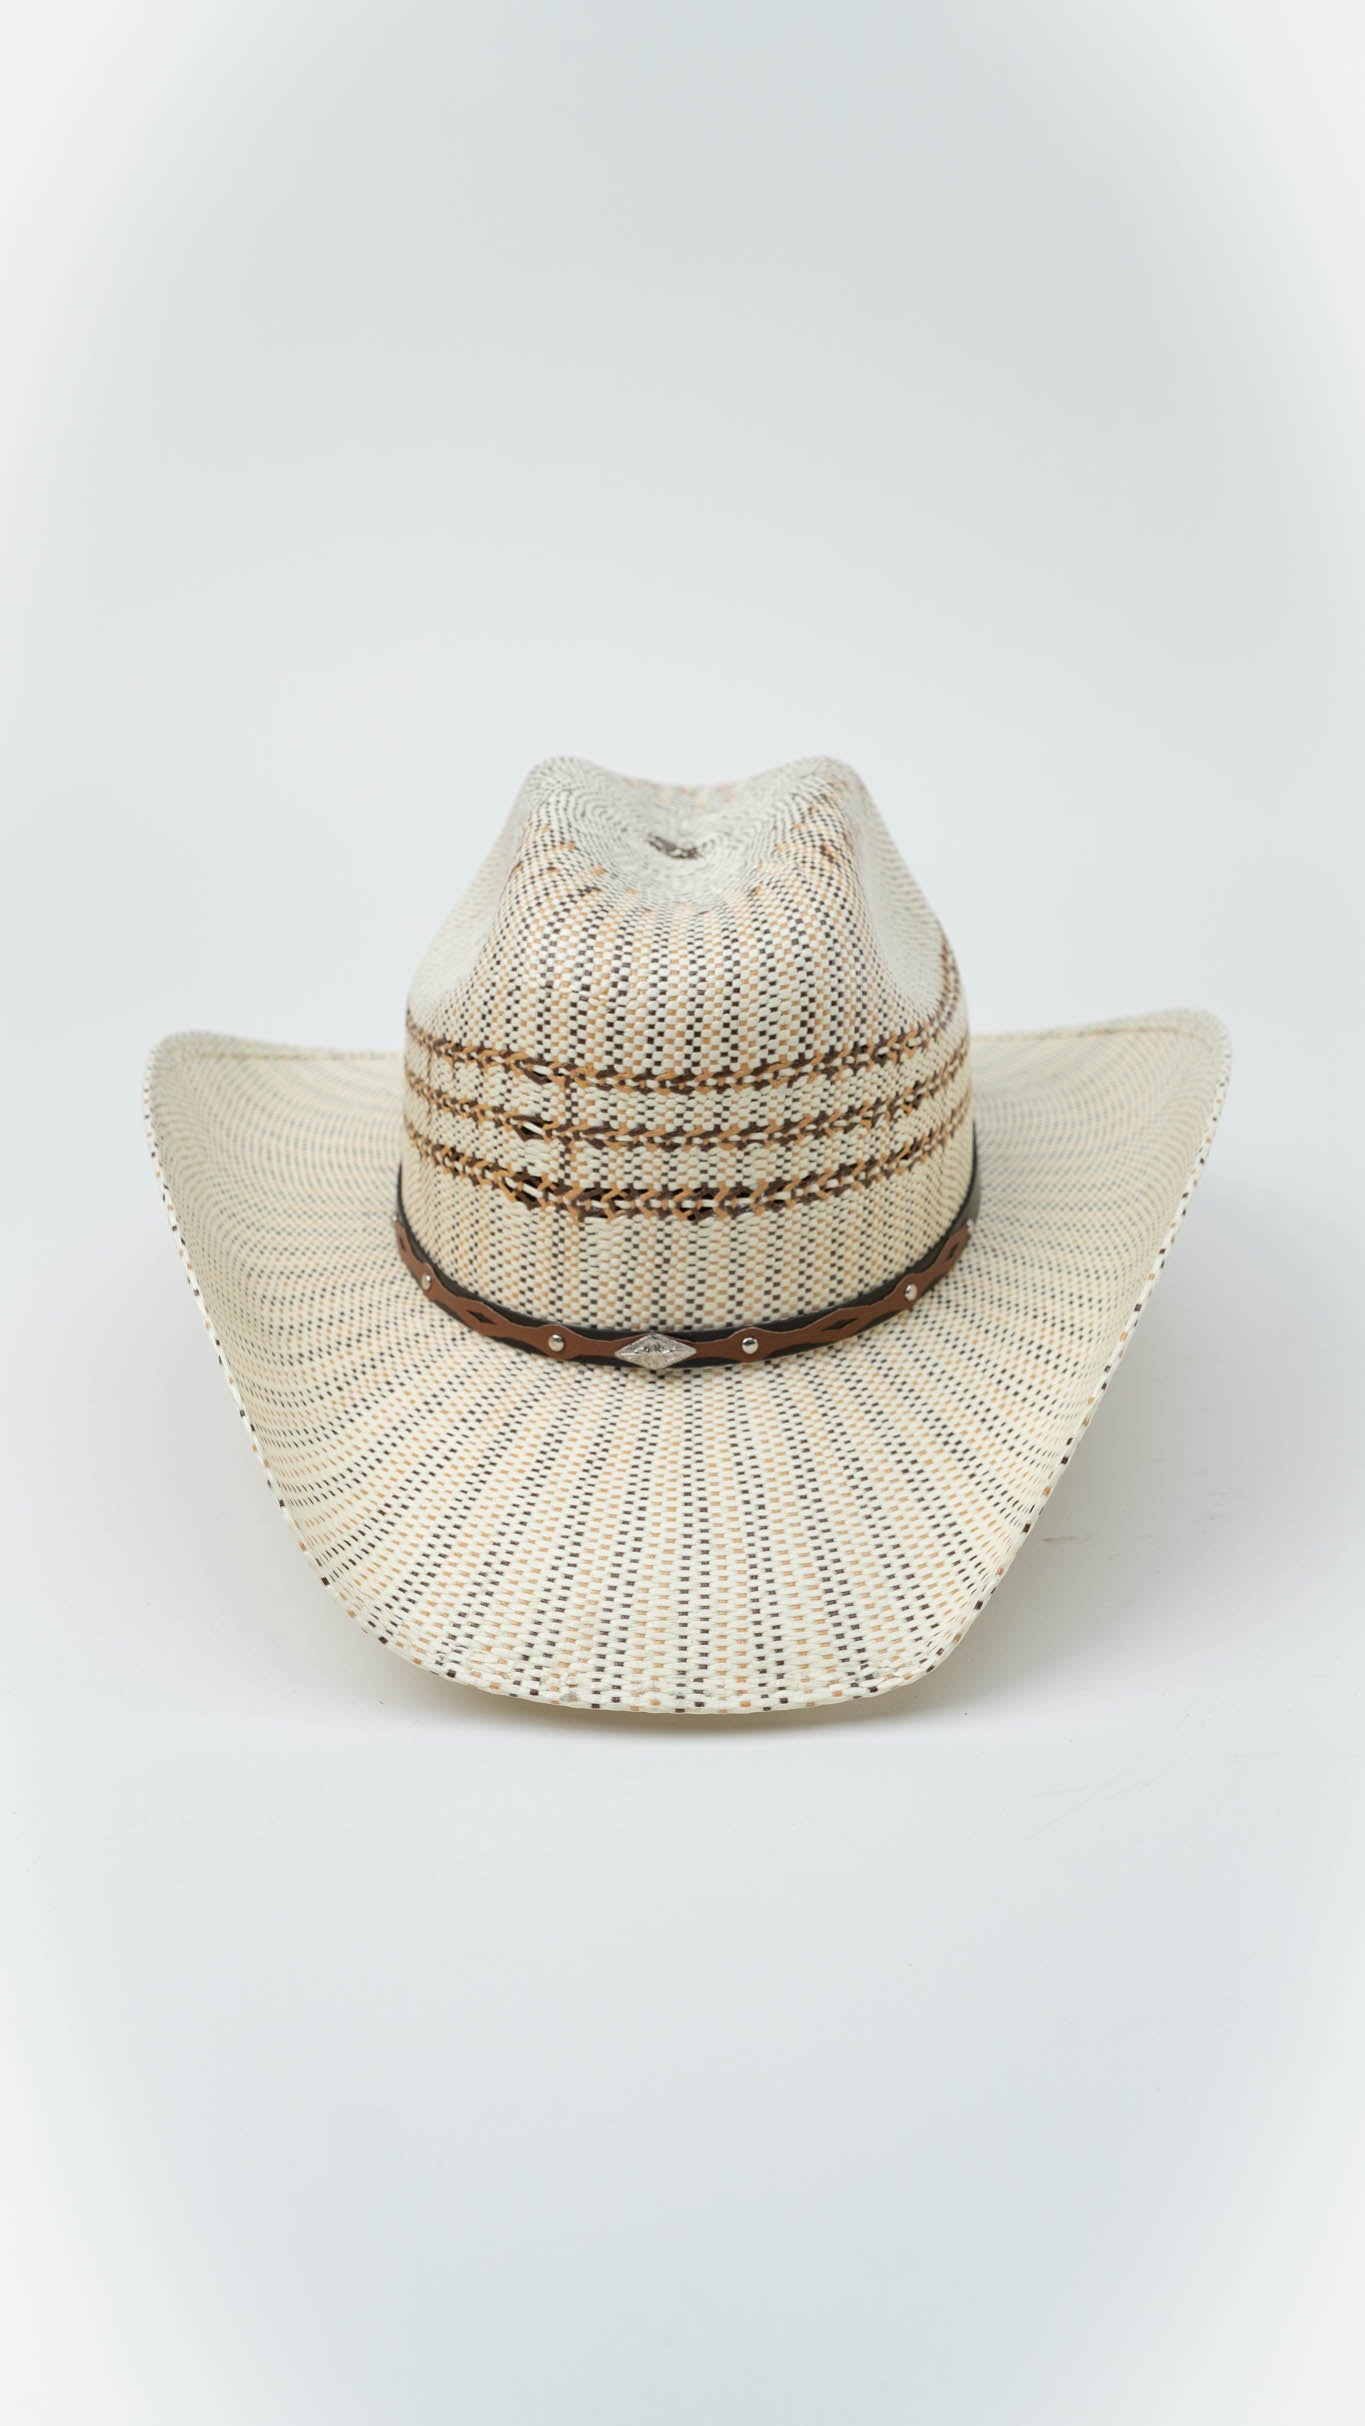 The Little Miguel Straw Hat